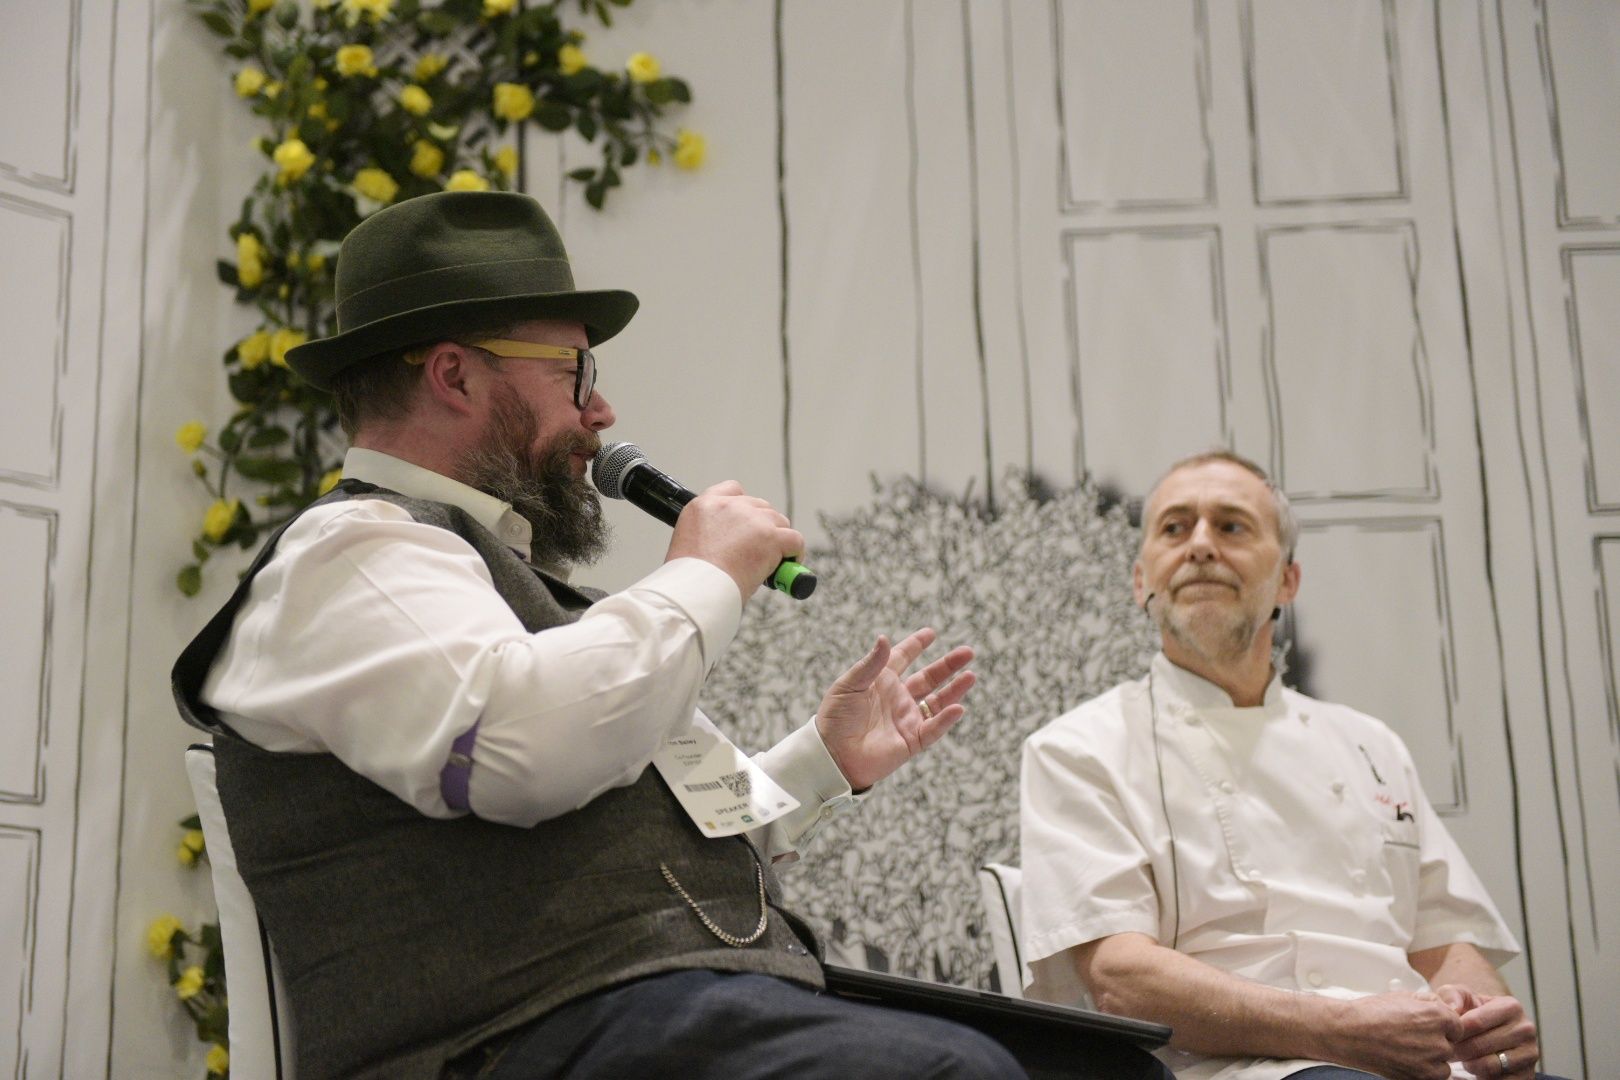 Shifting kitchen cultures with Michel Roux Jr